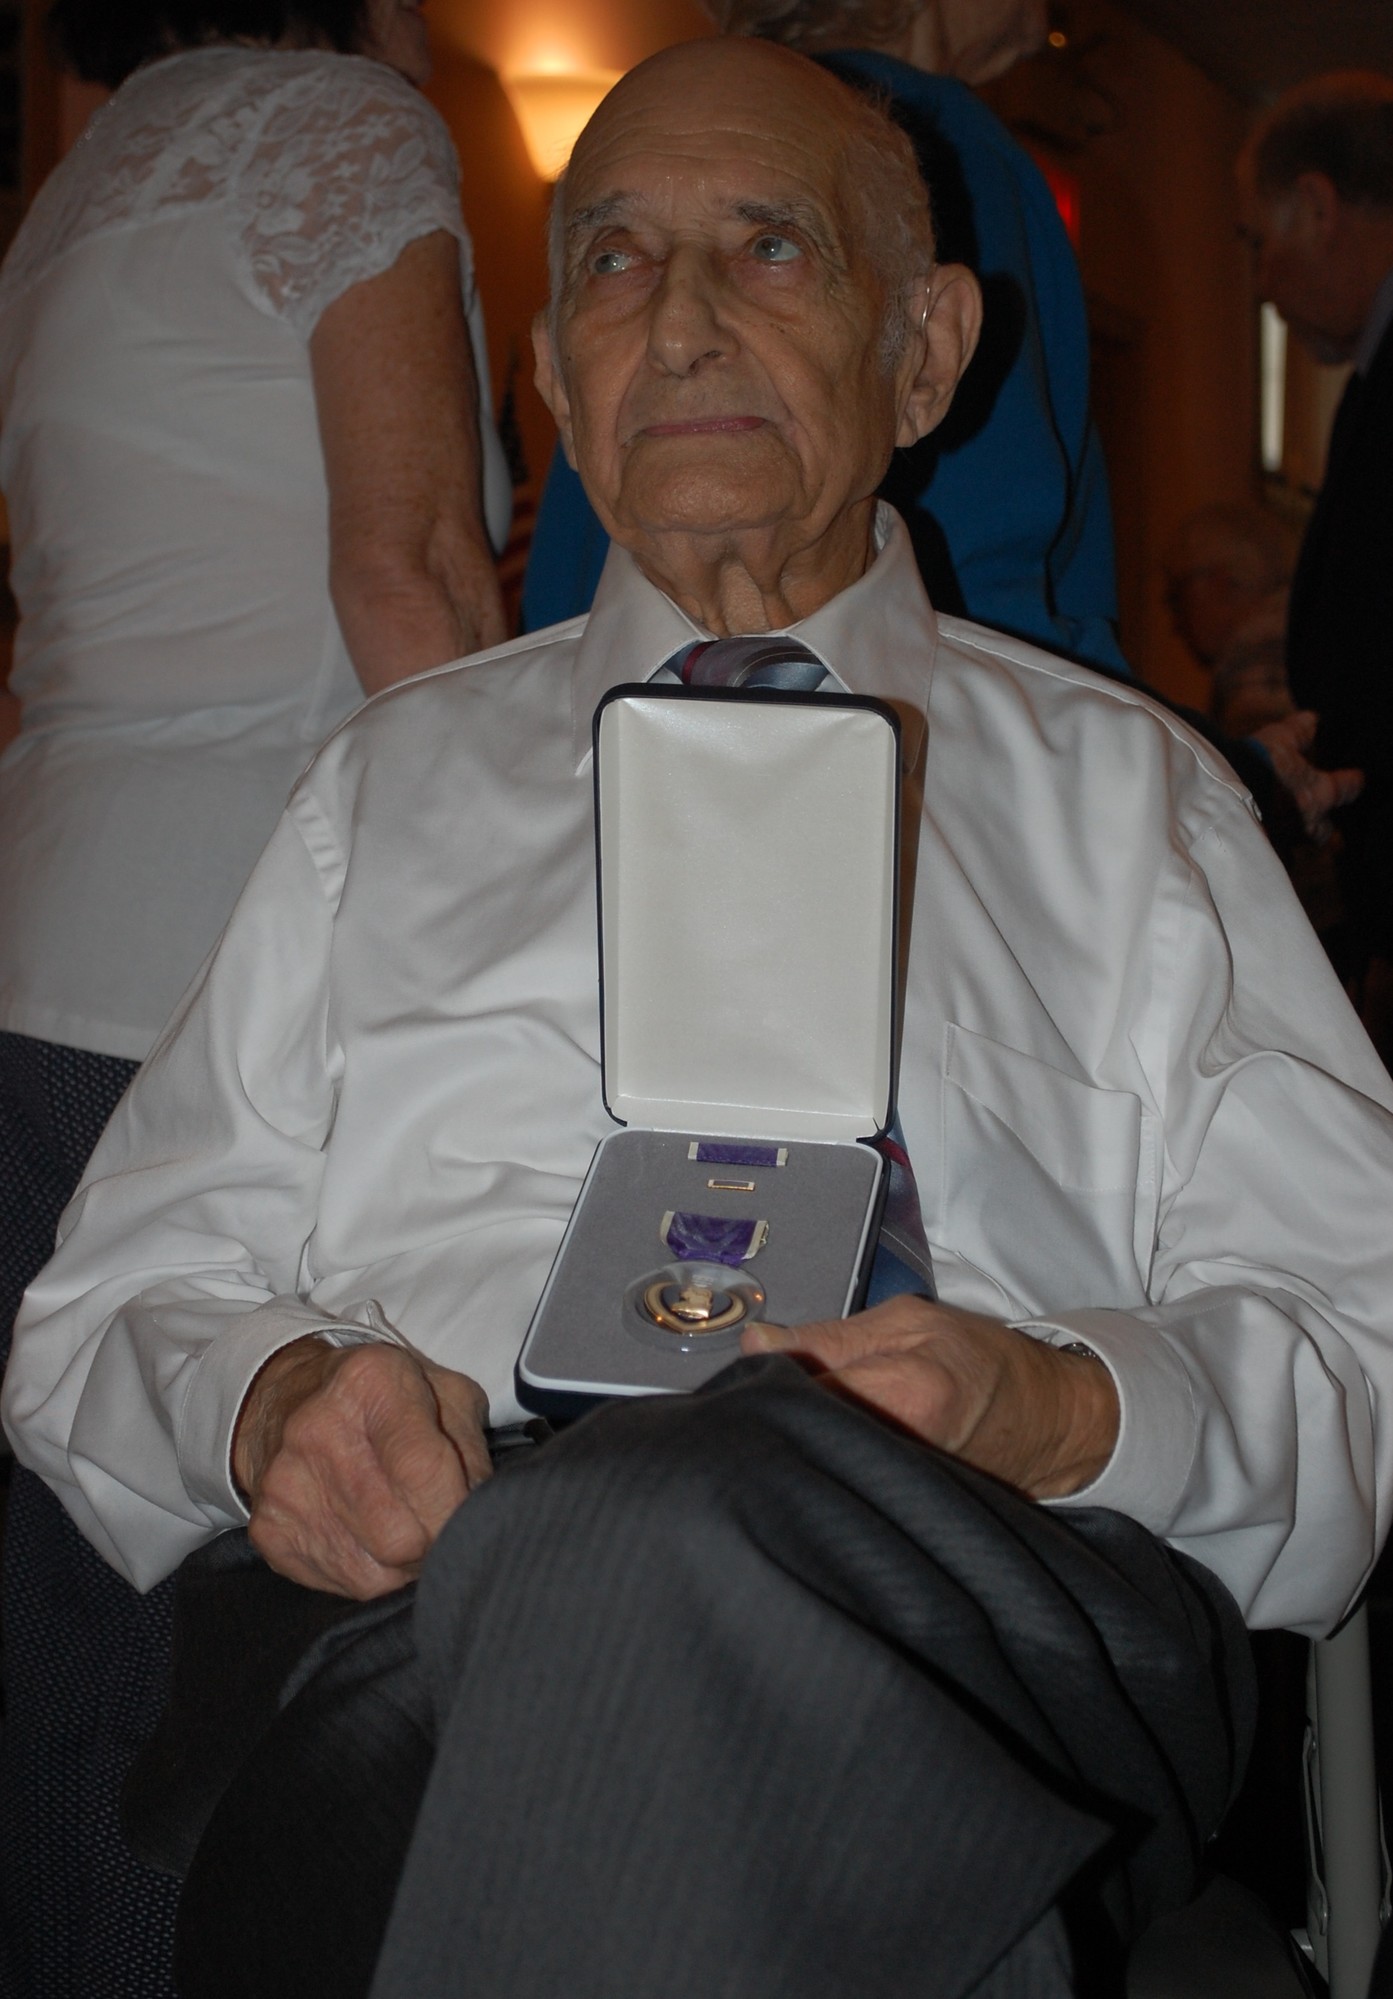 Leonard Stern said that receiving the medal on Monday made it the happiest day of his life.